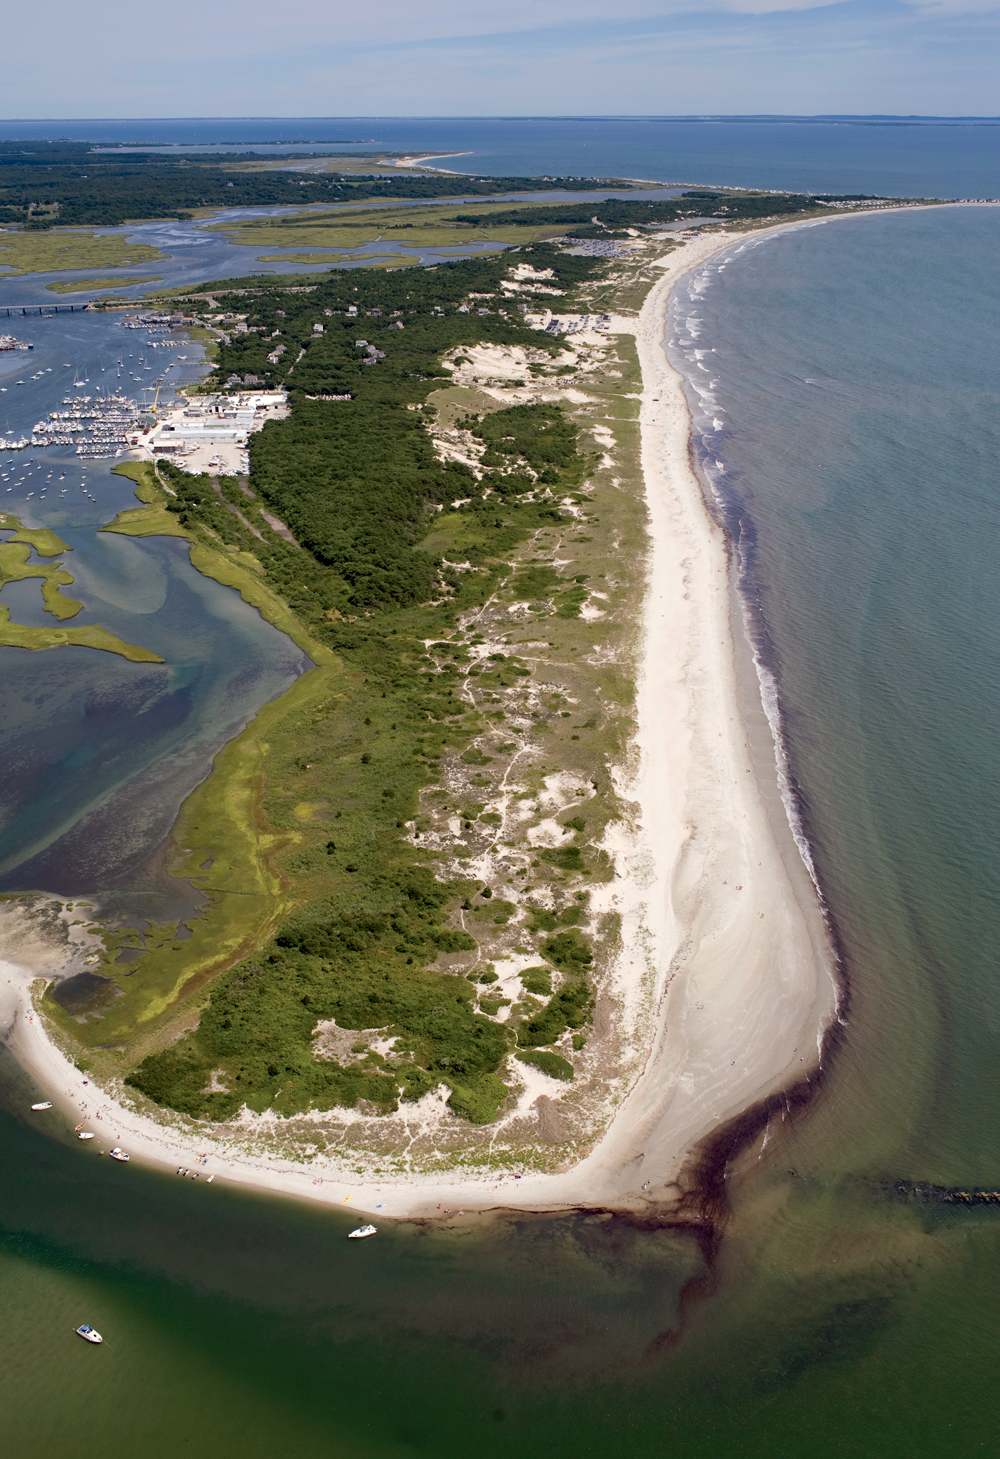  Two miles of sand facing Rhode Island Sound make Westport’s Horseneck Beach a great spot for sunning and swimmng. It’s part of a 600-acre Massachusetts state reservation encompassing barrier-beach, estuary, and salt-marsh habitats.